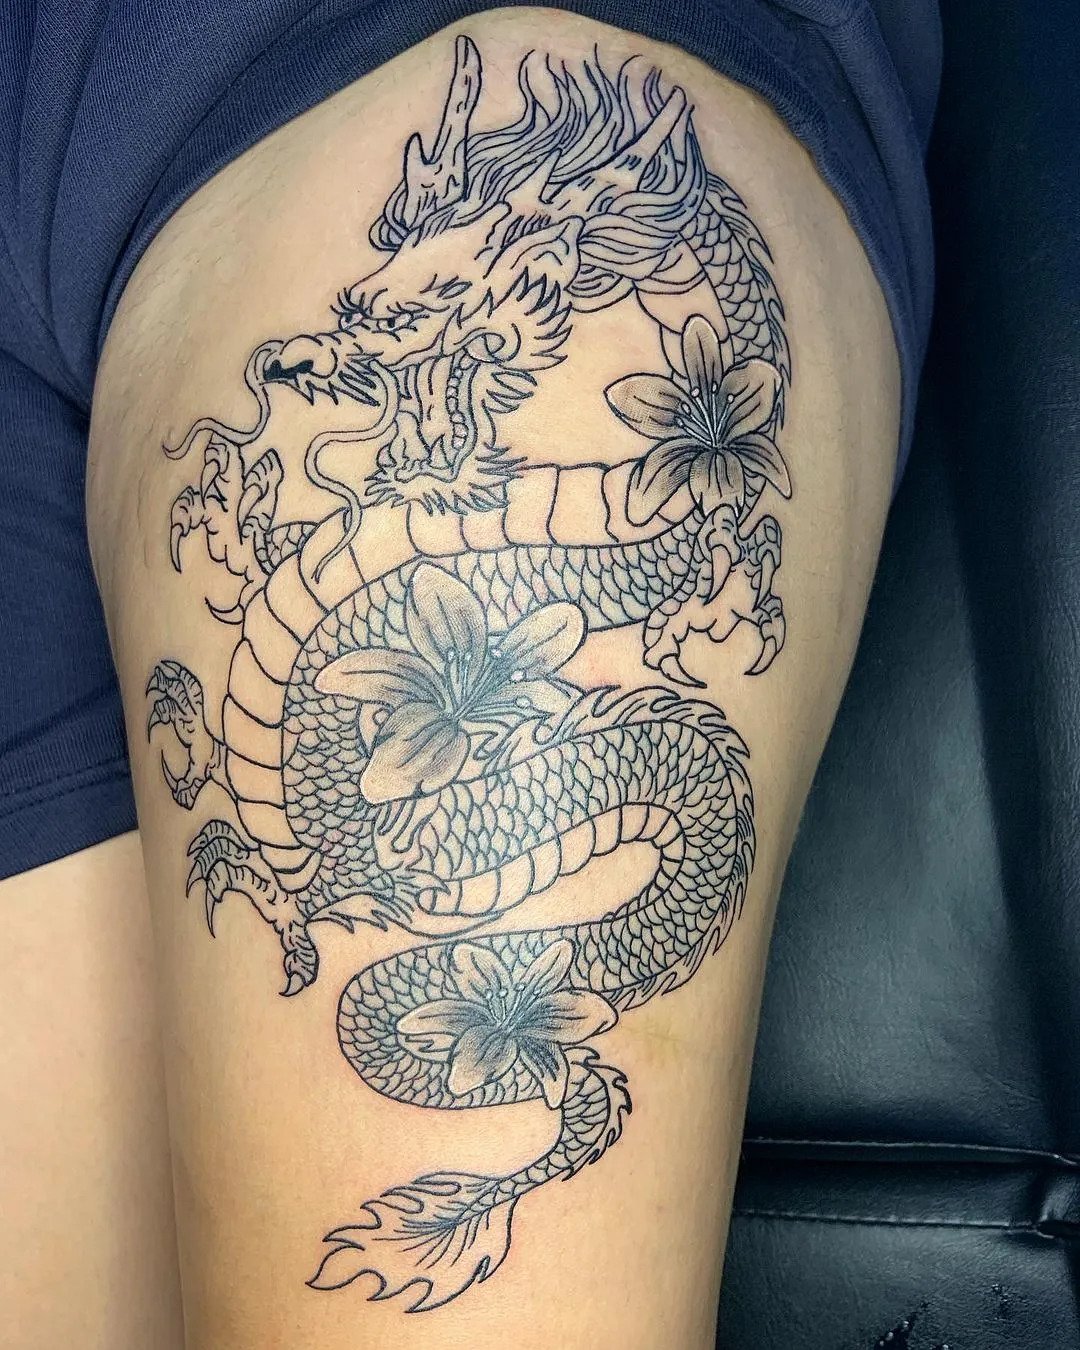 Thigh is perfect fit for amazing dragon tattoo